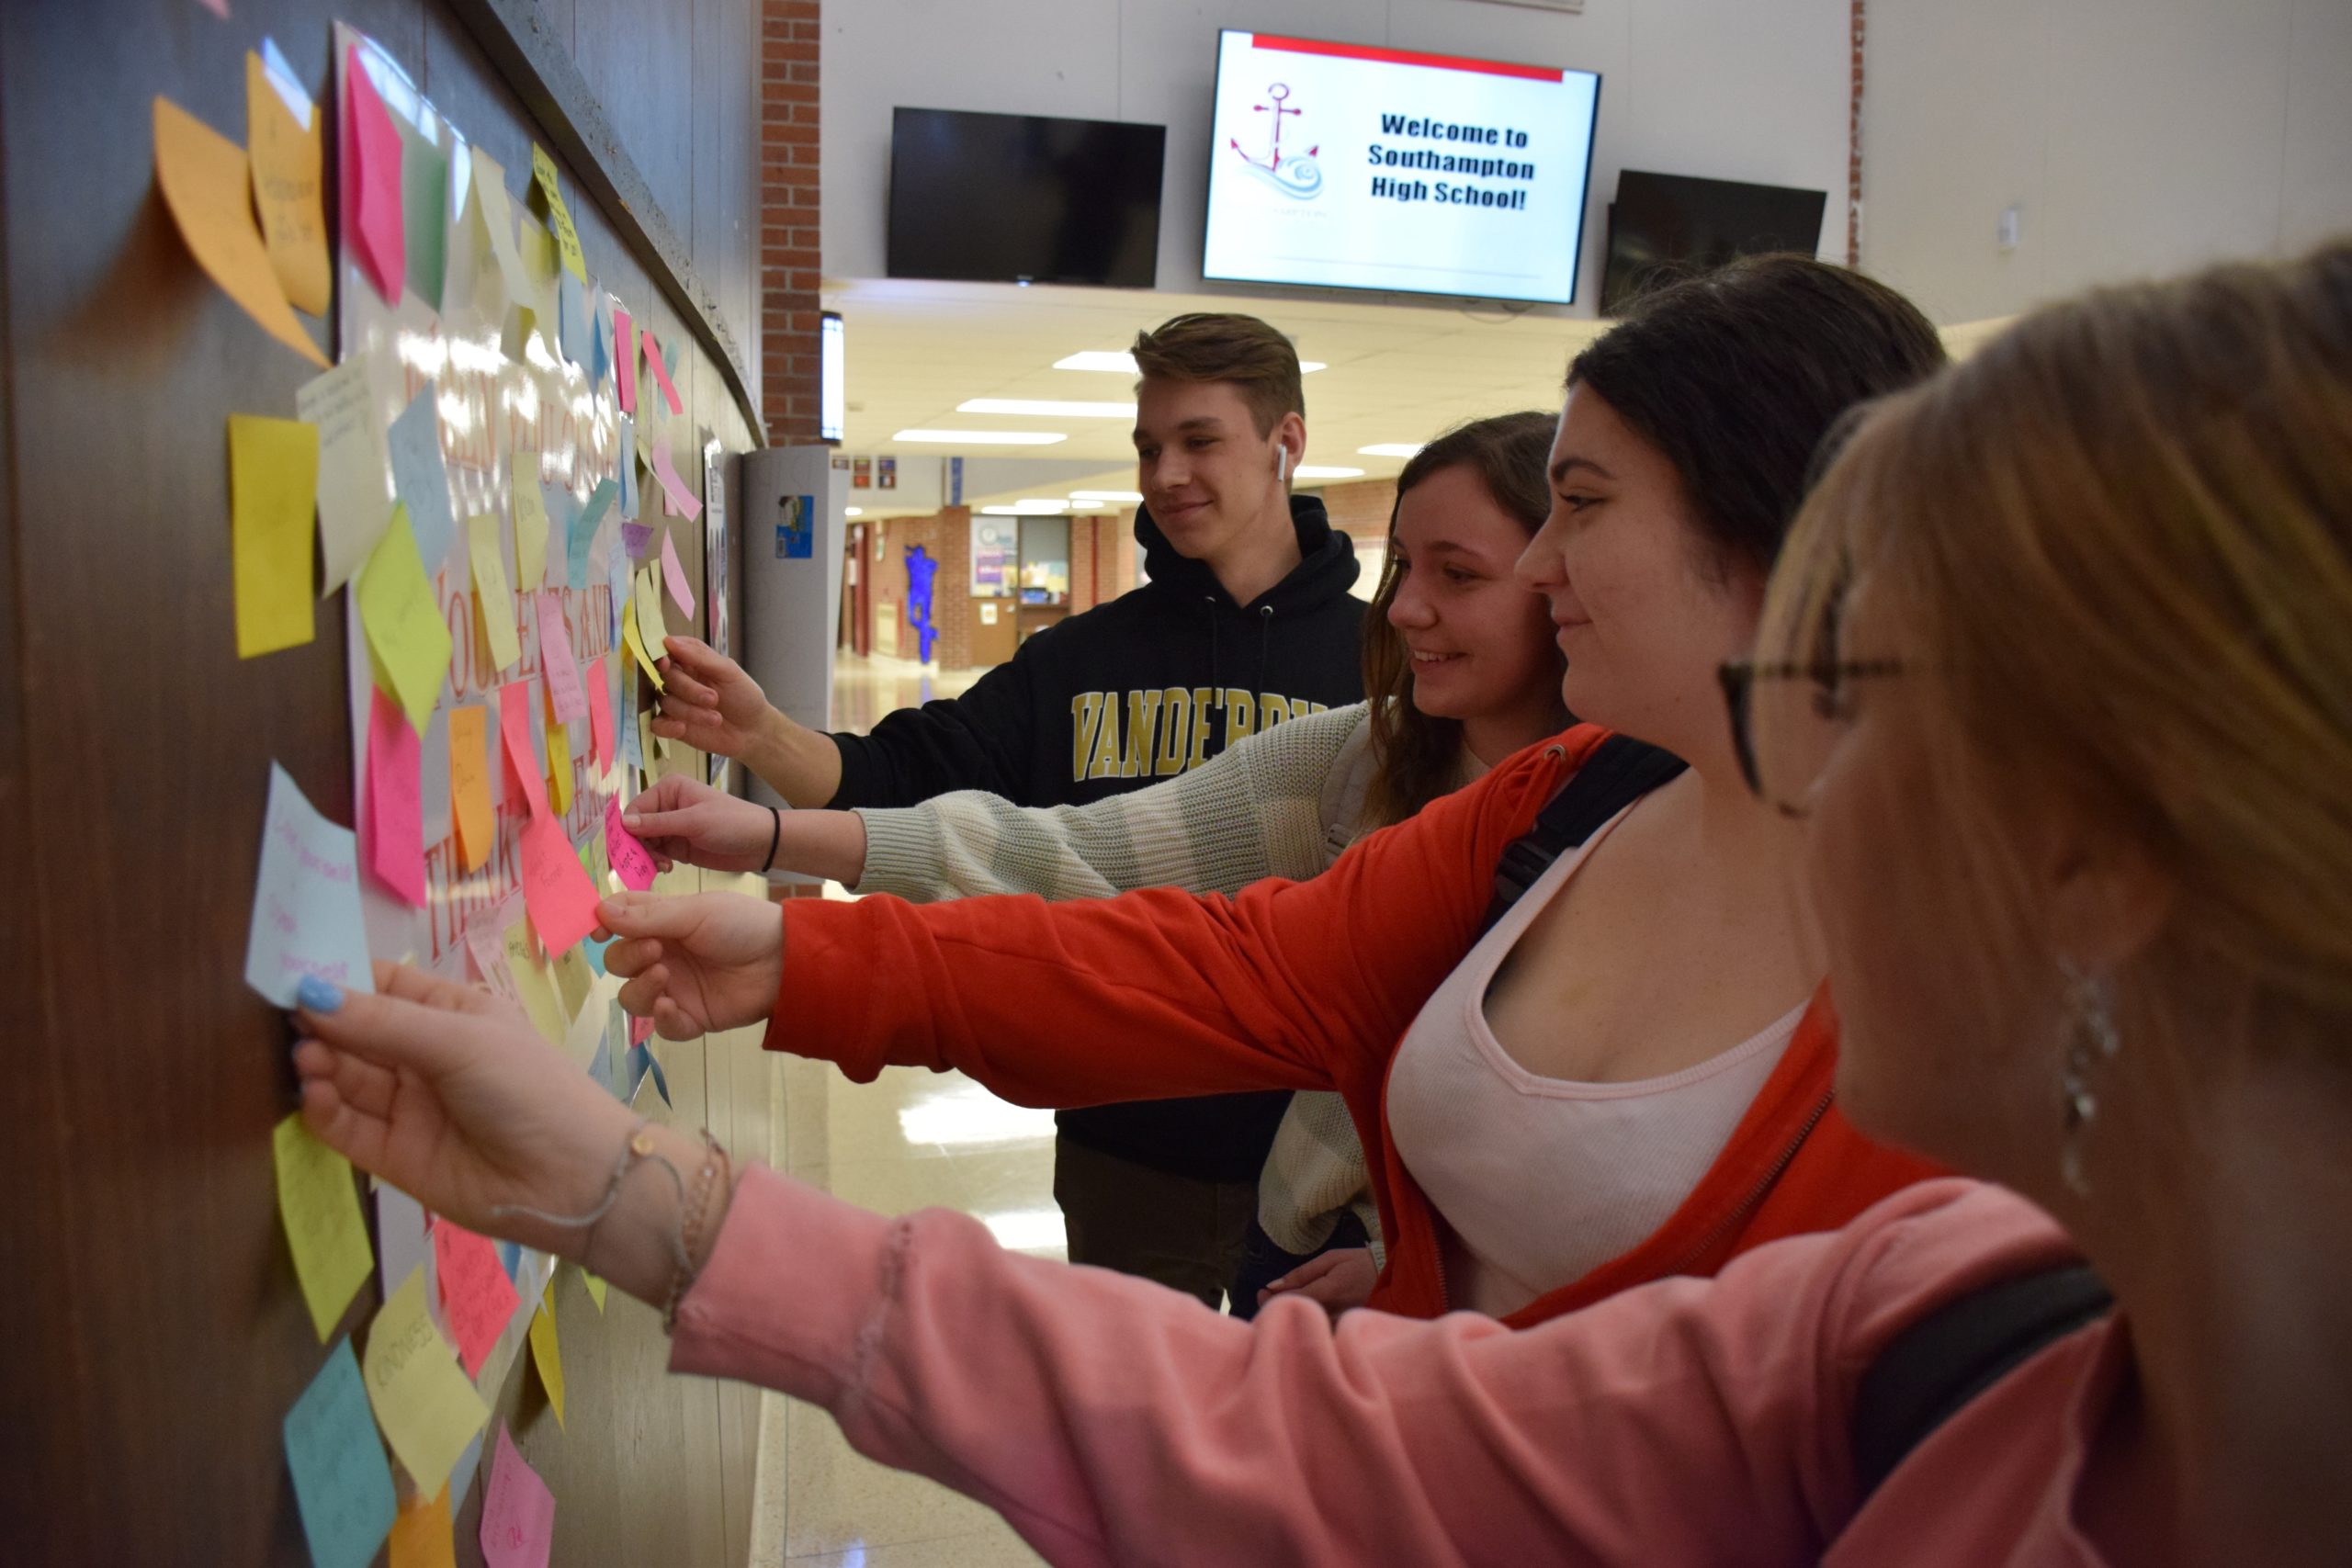 To mark Black History Month, Southampton High School students were encouraged to write messages of peace on Post-it notes and share them on a display in the school’s main lobby. Students wrote powerful words about the importance of peace and what it means to them.